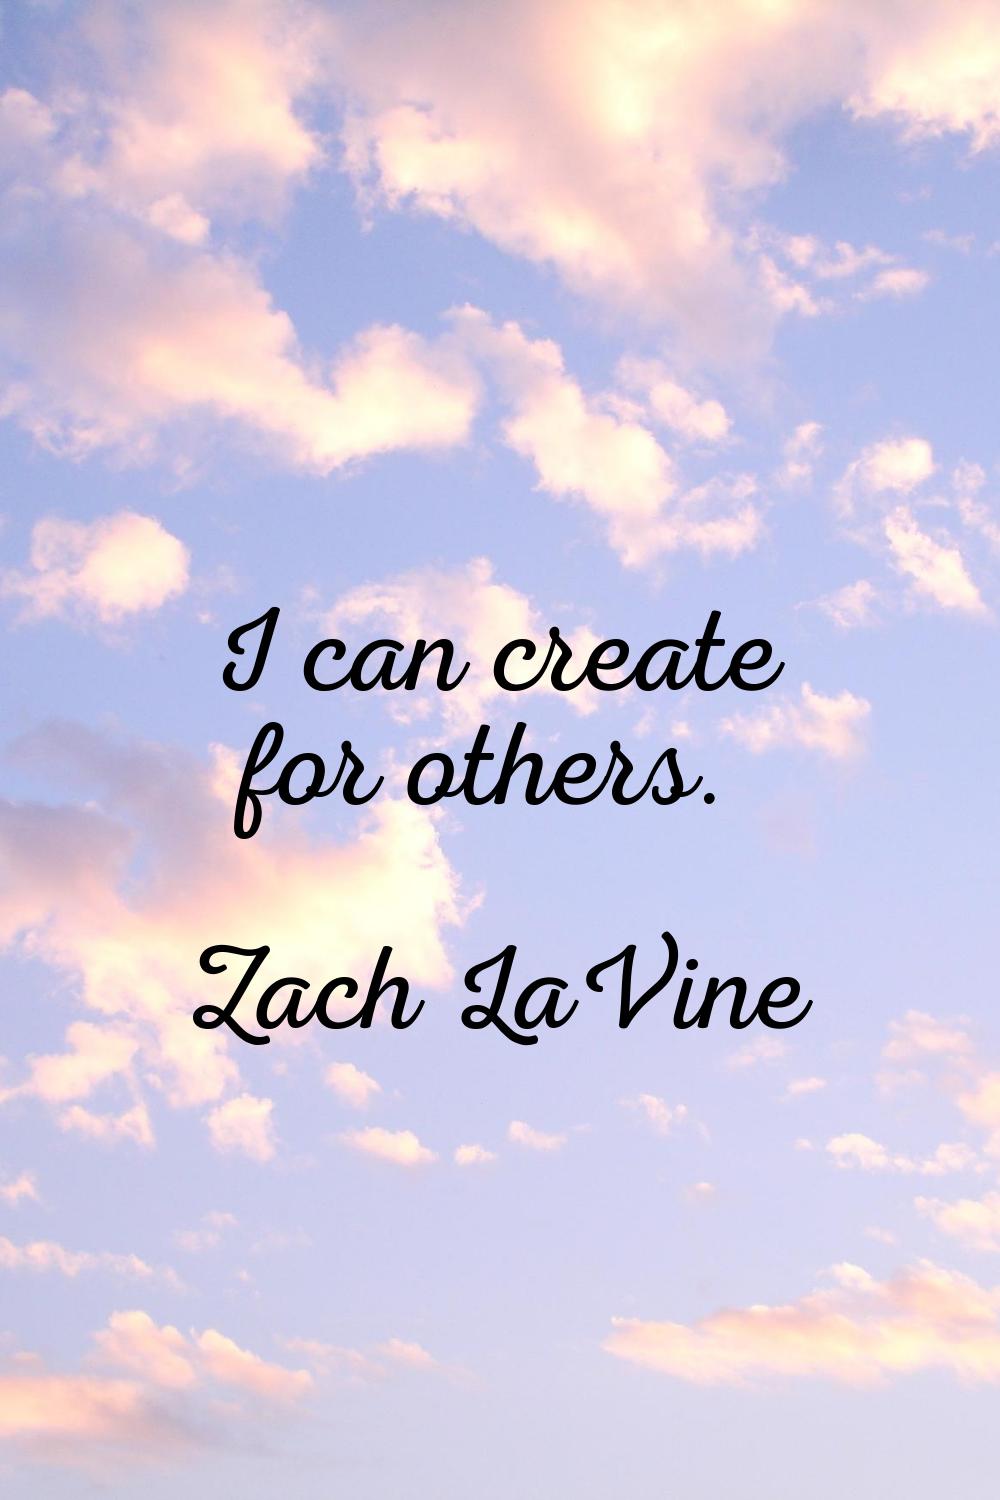 I can create for others.